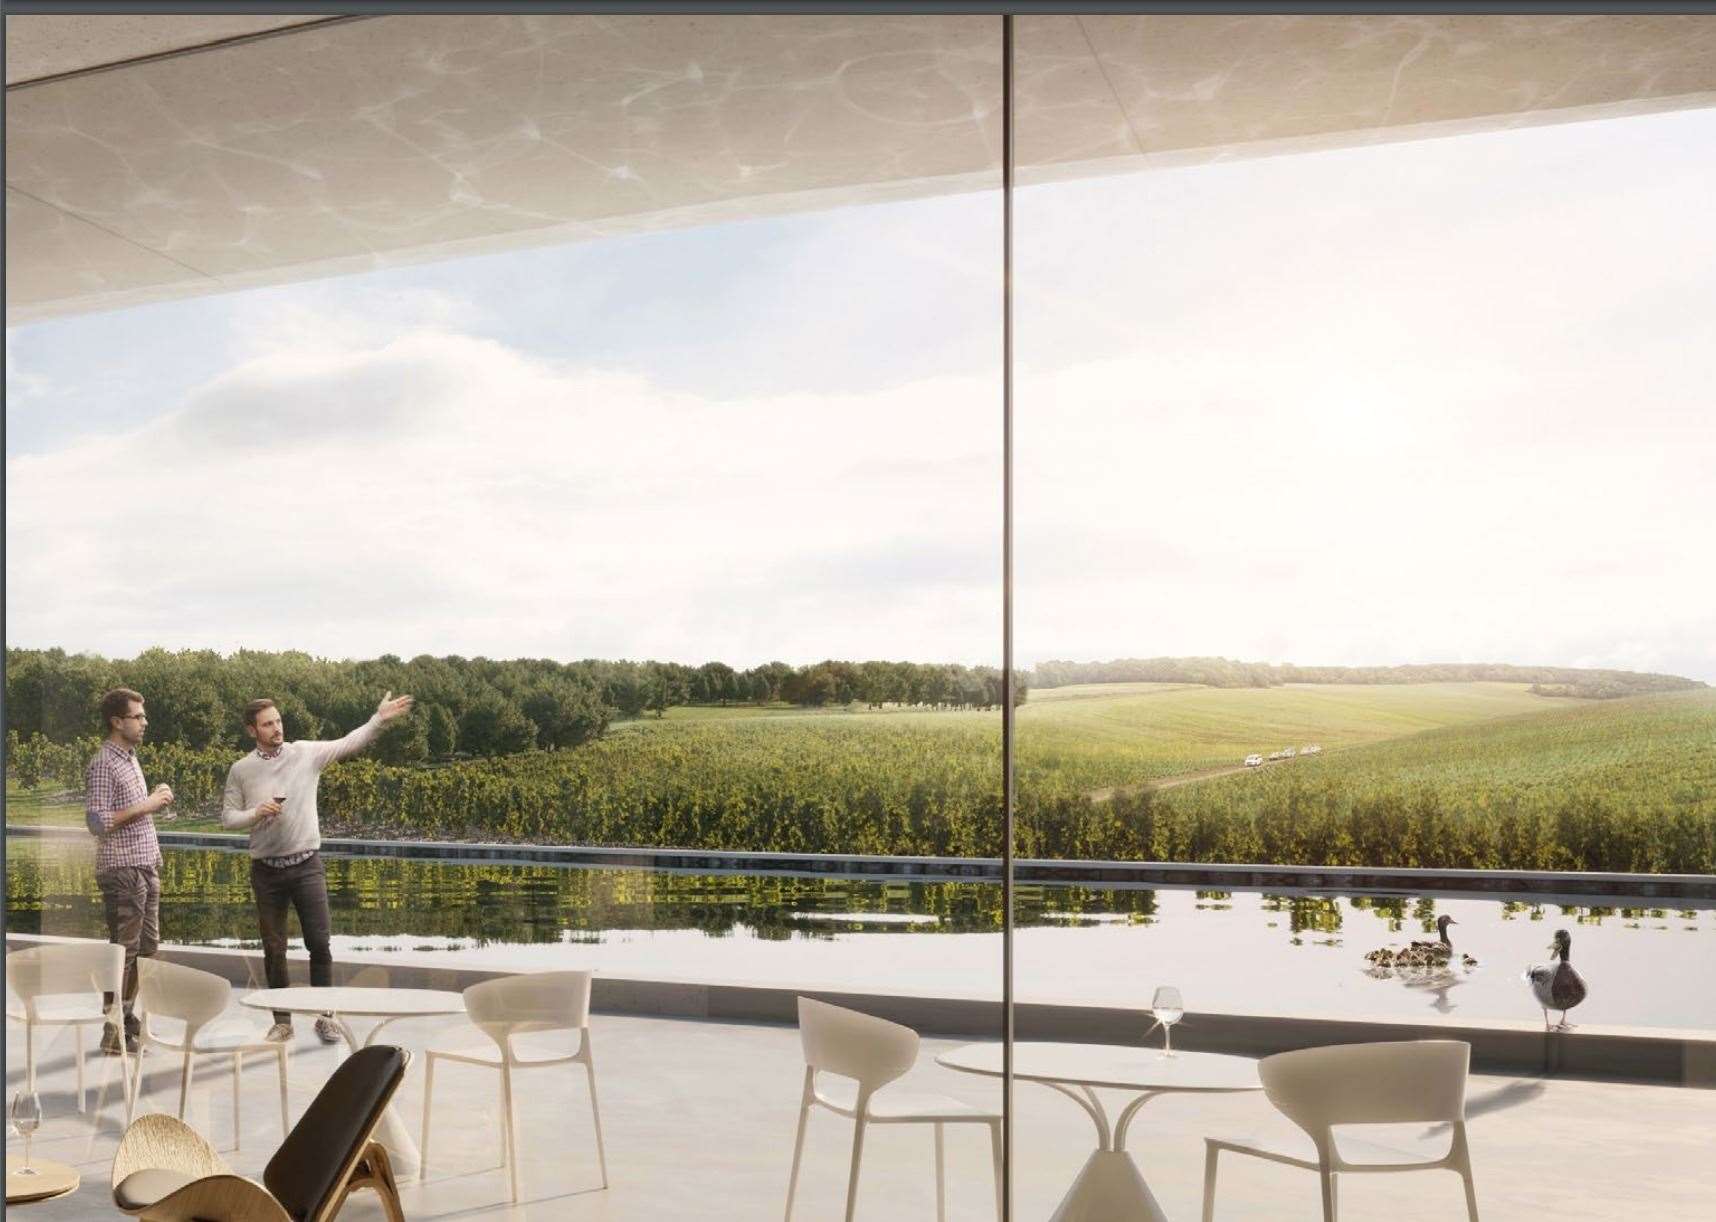 An artist's impression of Vineyard Farms Ltd planned winery and visitor centre